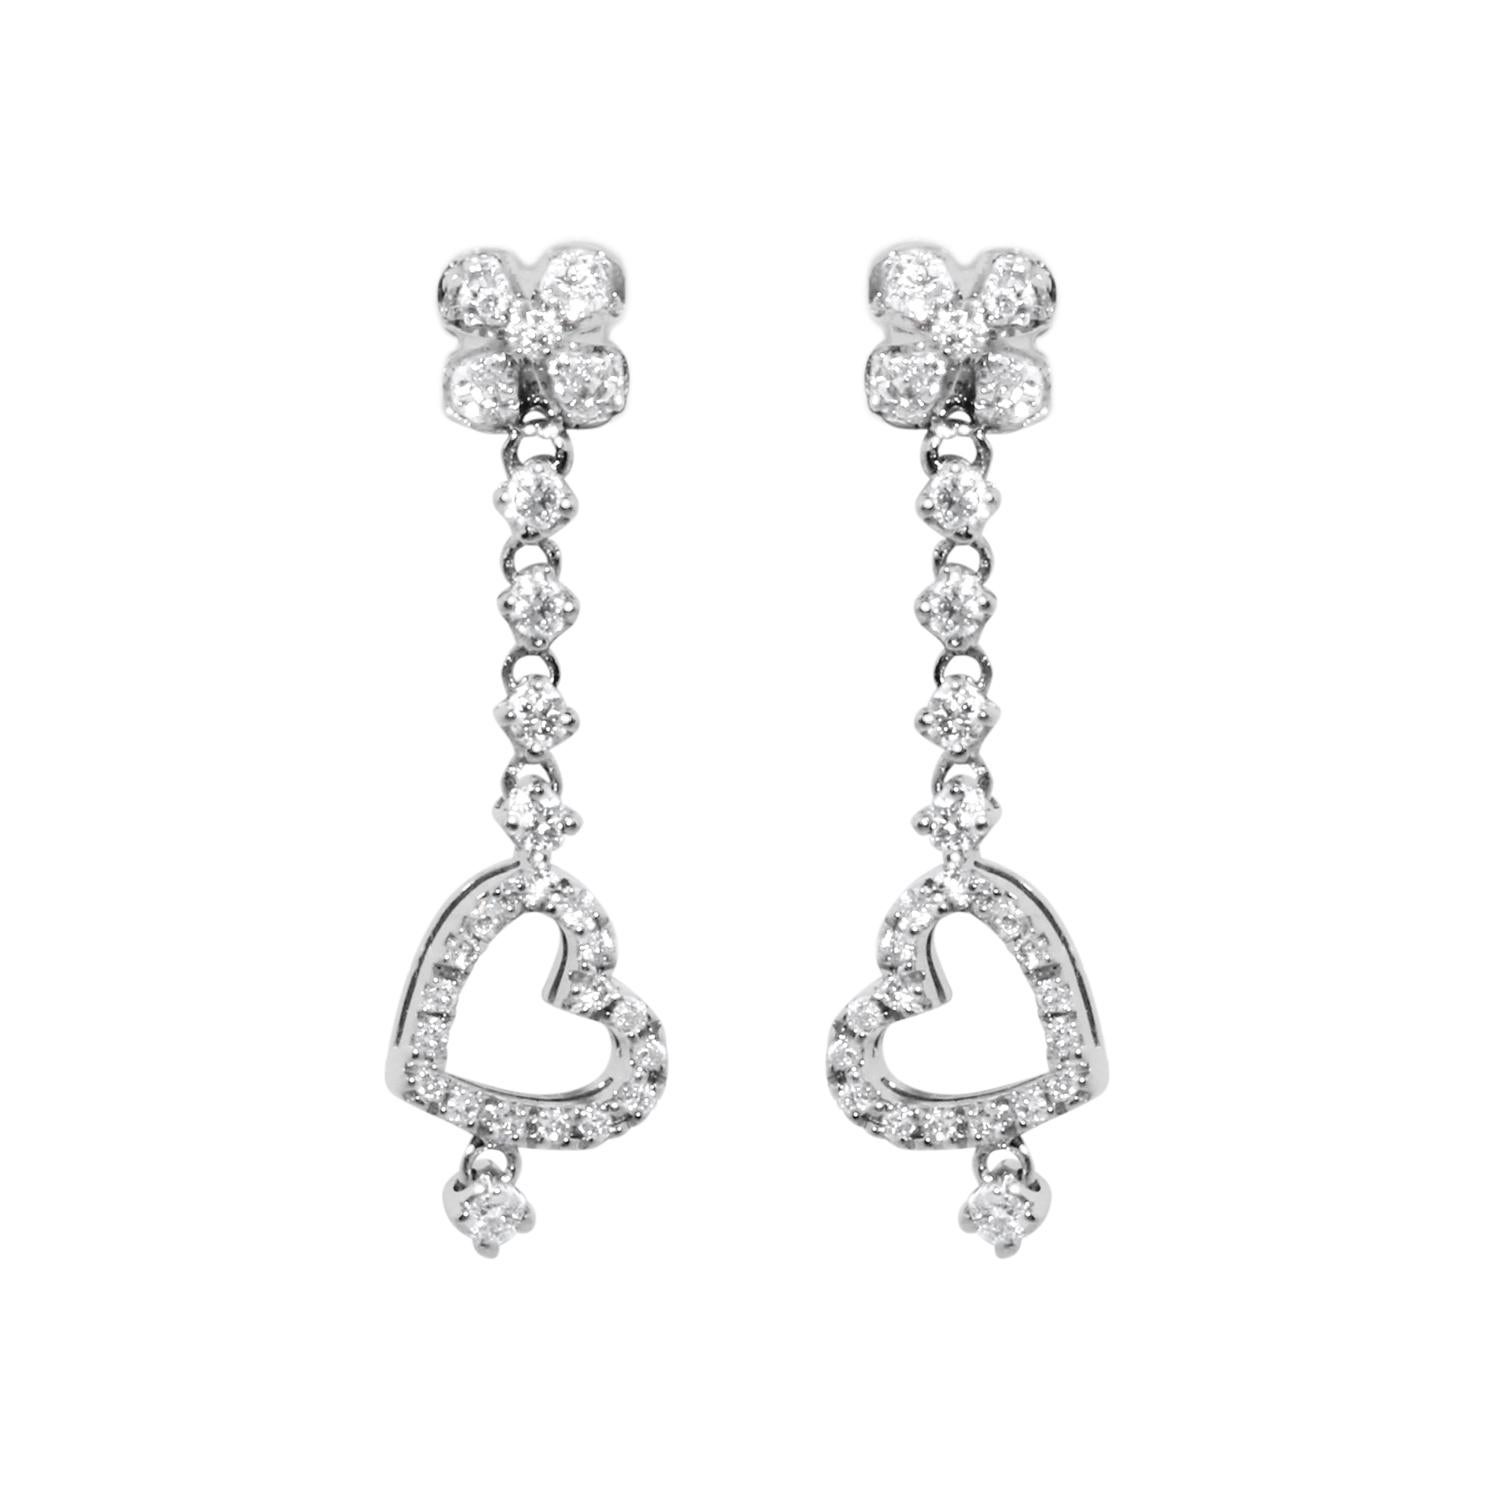 Brilliant beacons of optimism and love, the four-leaf clover and the heart are radiant symbols of a bright love. These striking diamond drop earrings exude a dazzling brilliance, both precious and sustainable. Valentine's Day limited edition.
18k